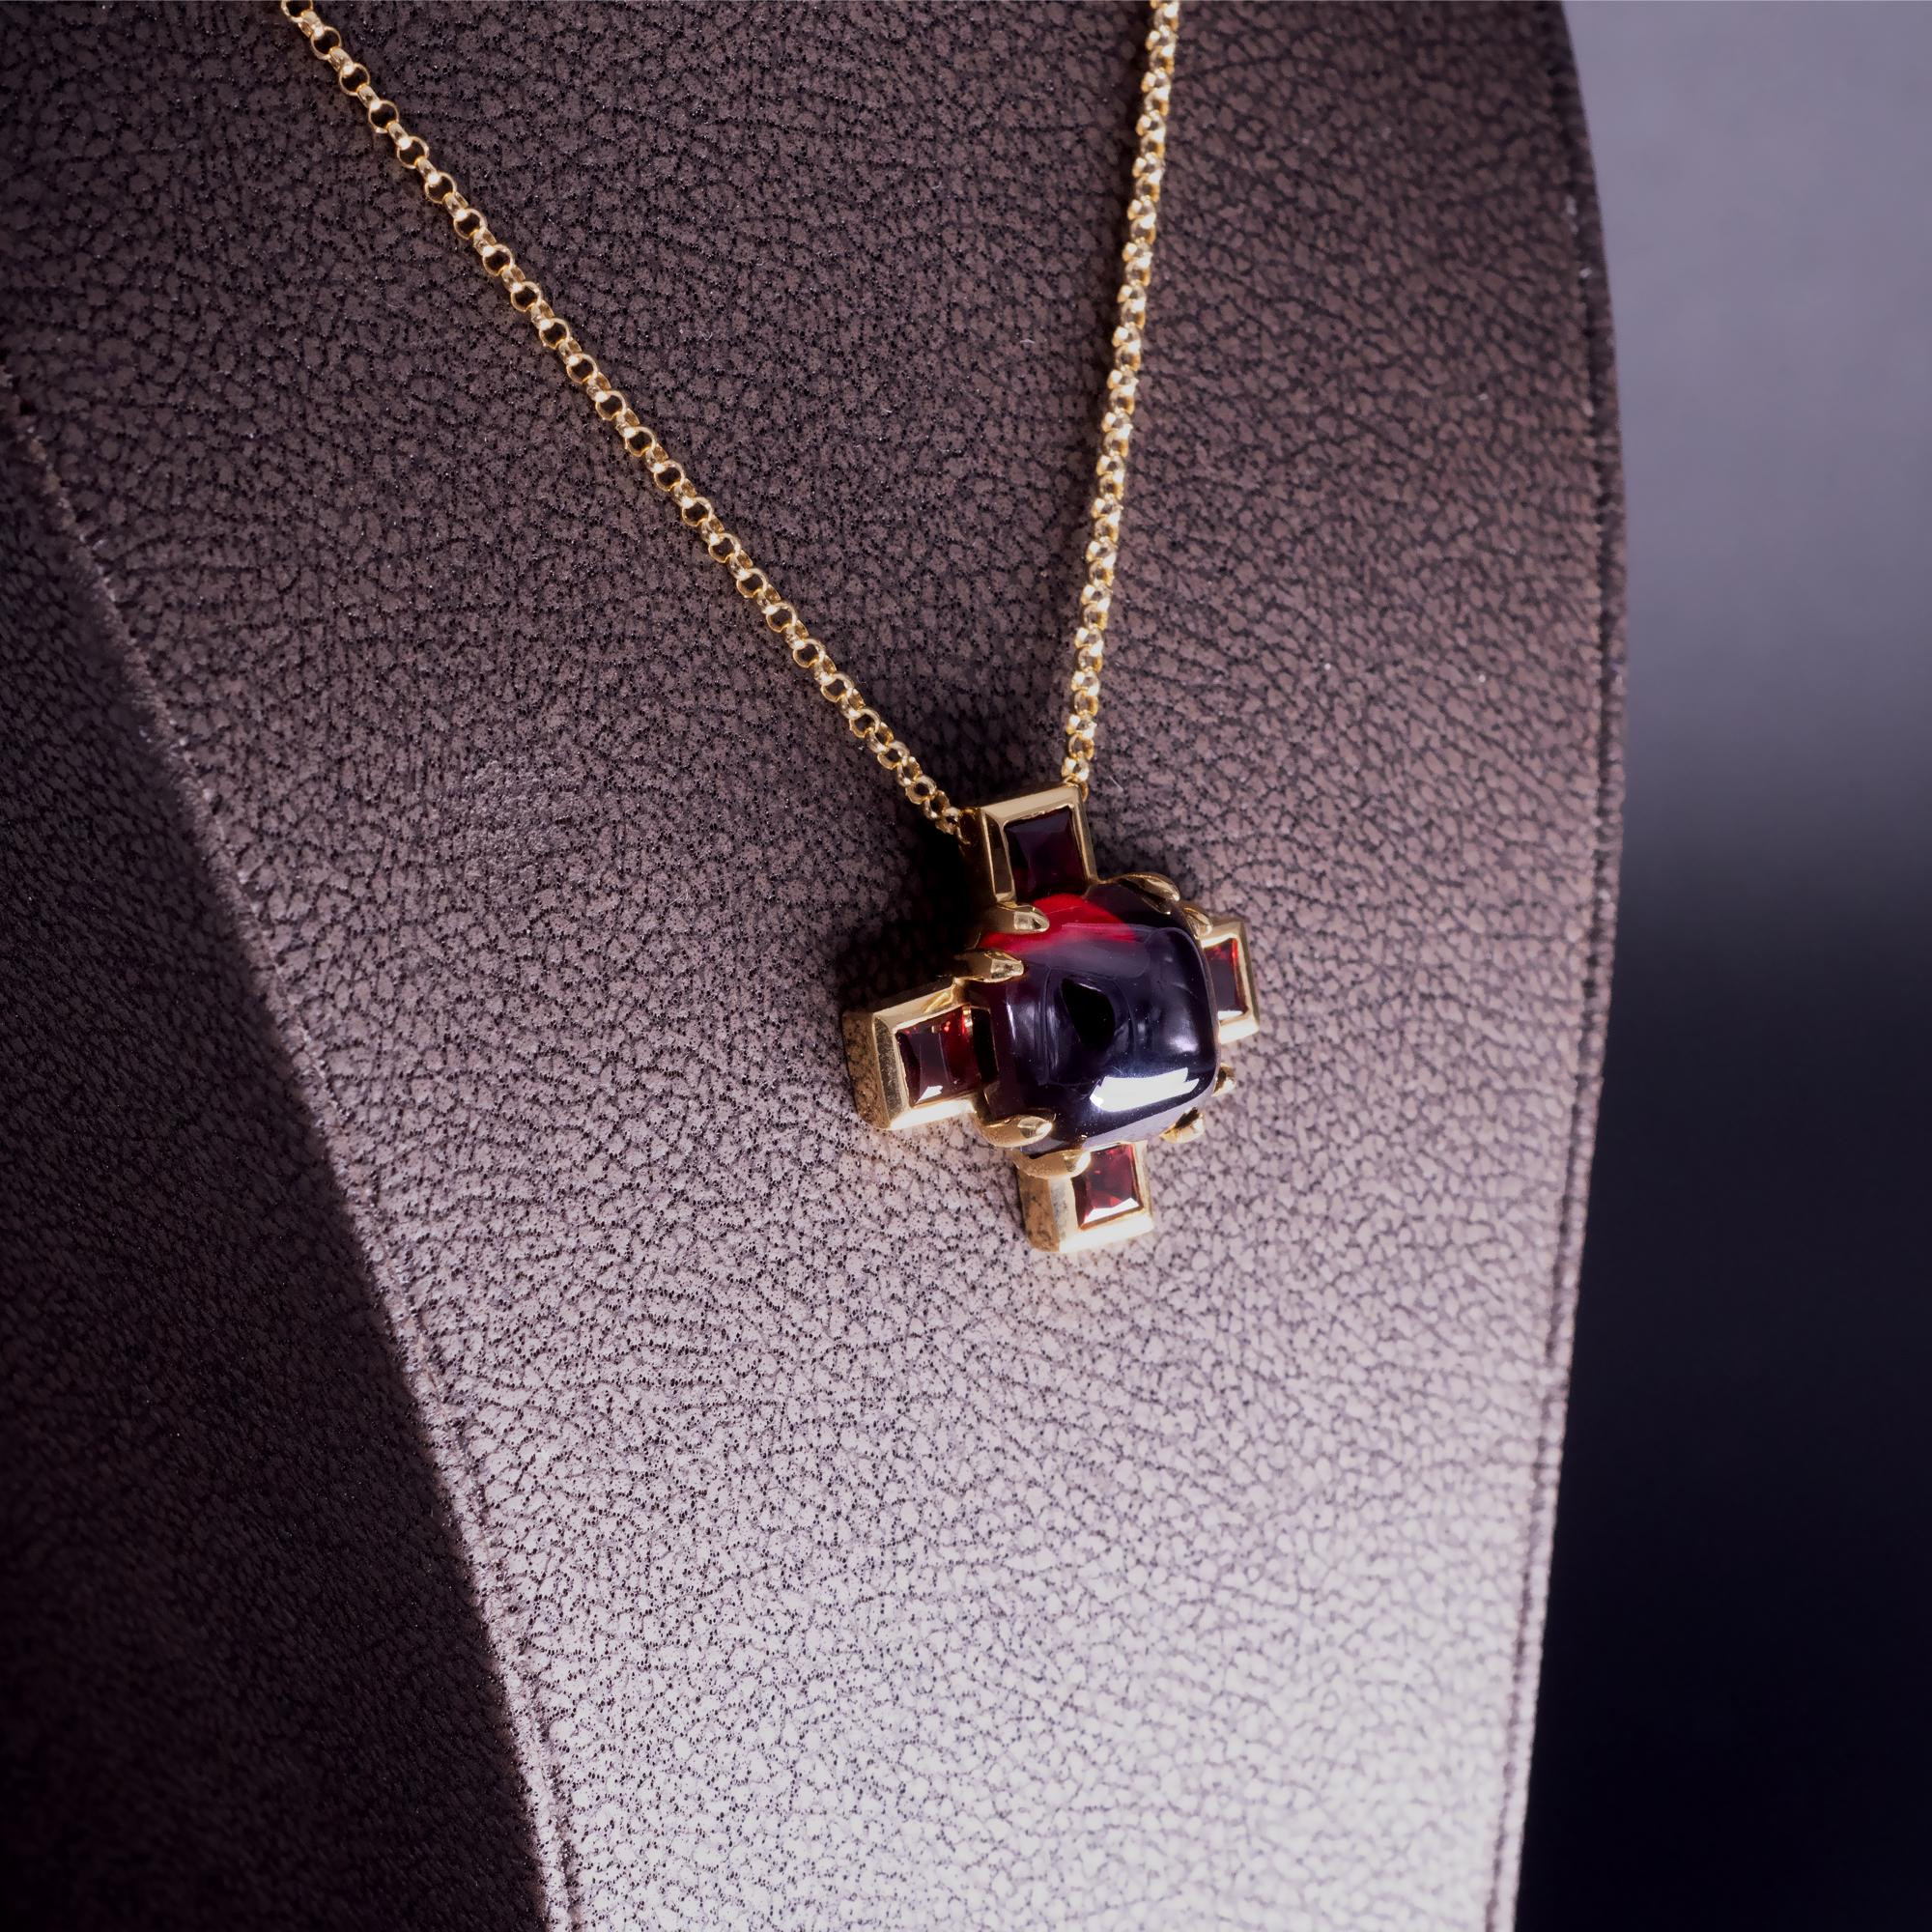 Very fashionnable, modern looking pendant necklace. A nice chubby sugarloaf cabochon garnet in it center, while four princess cut garnets makes the branches of the cross.

